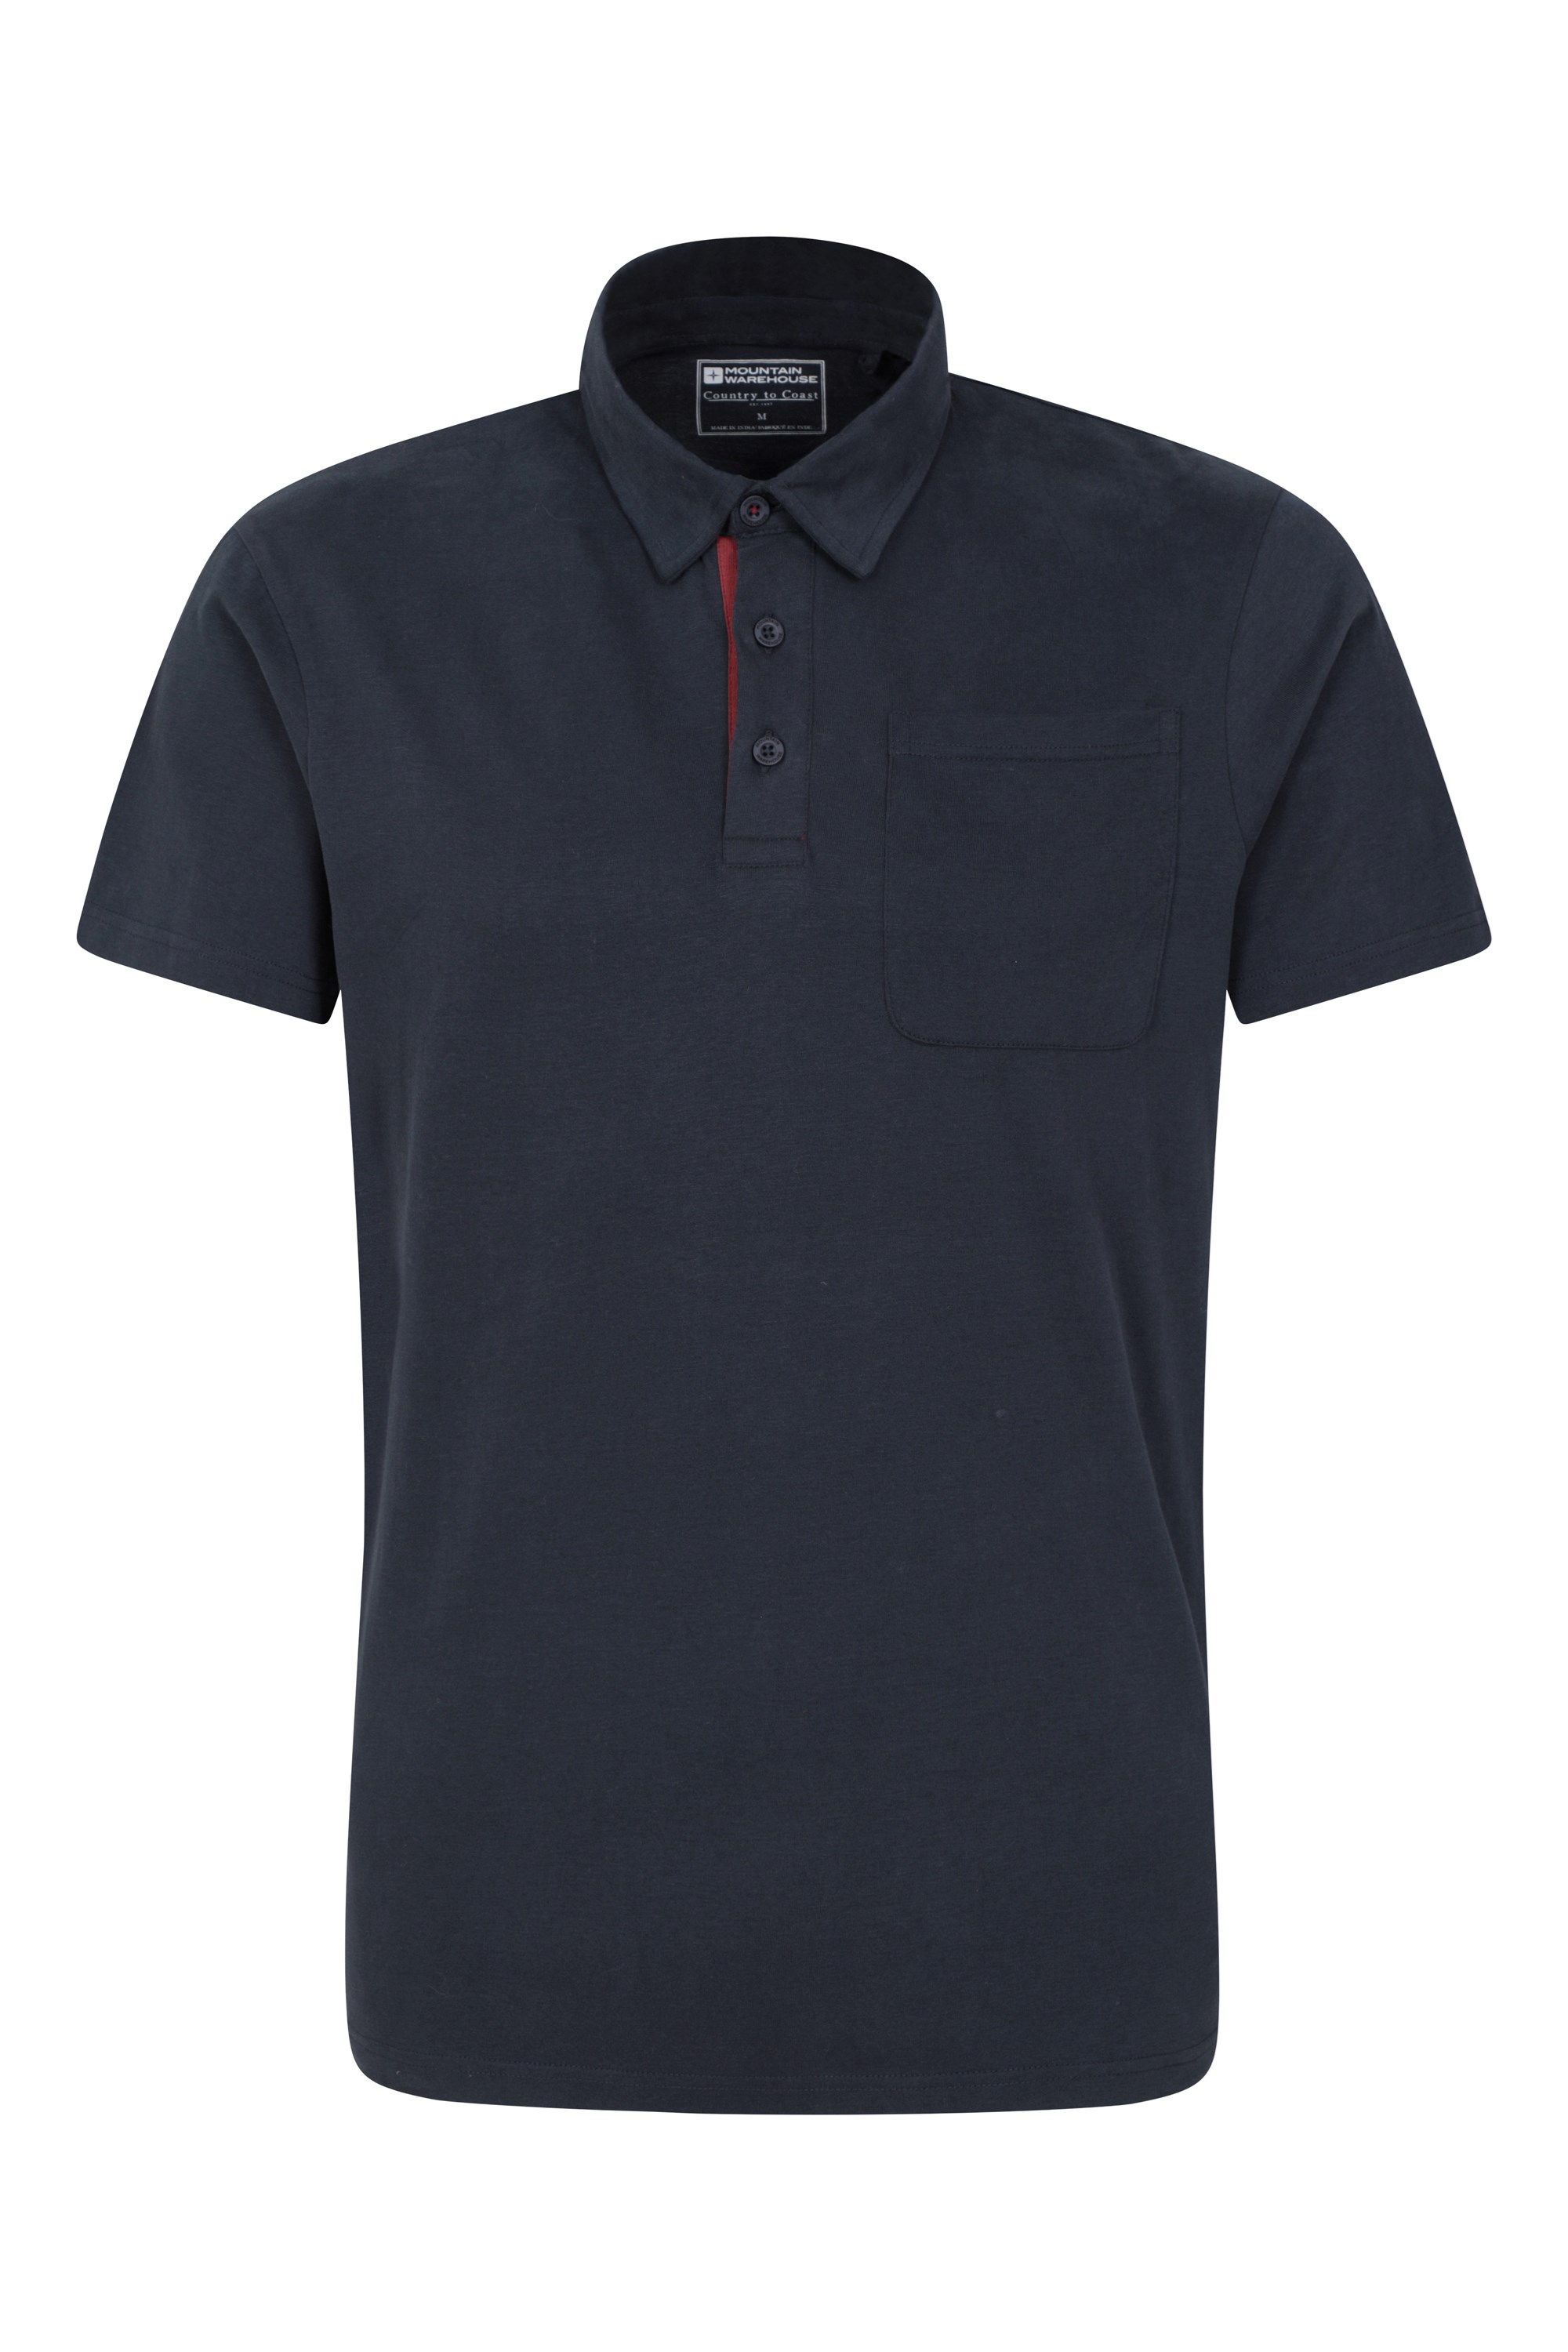 Mens Neale Supersoft Jersey Polo - Navy